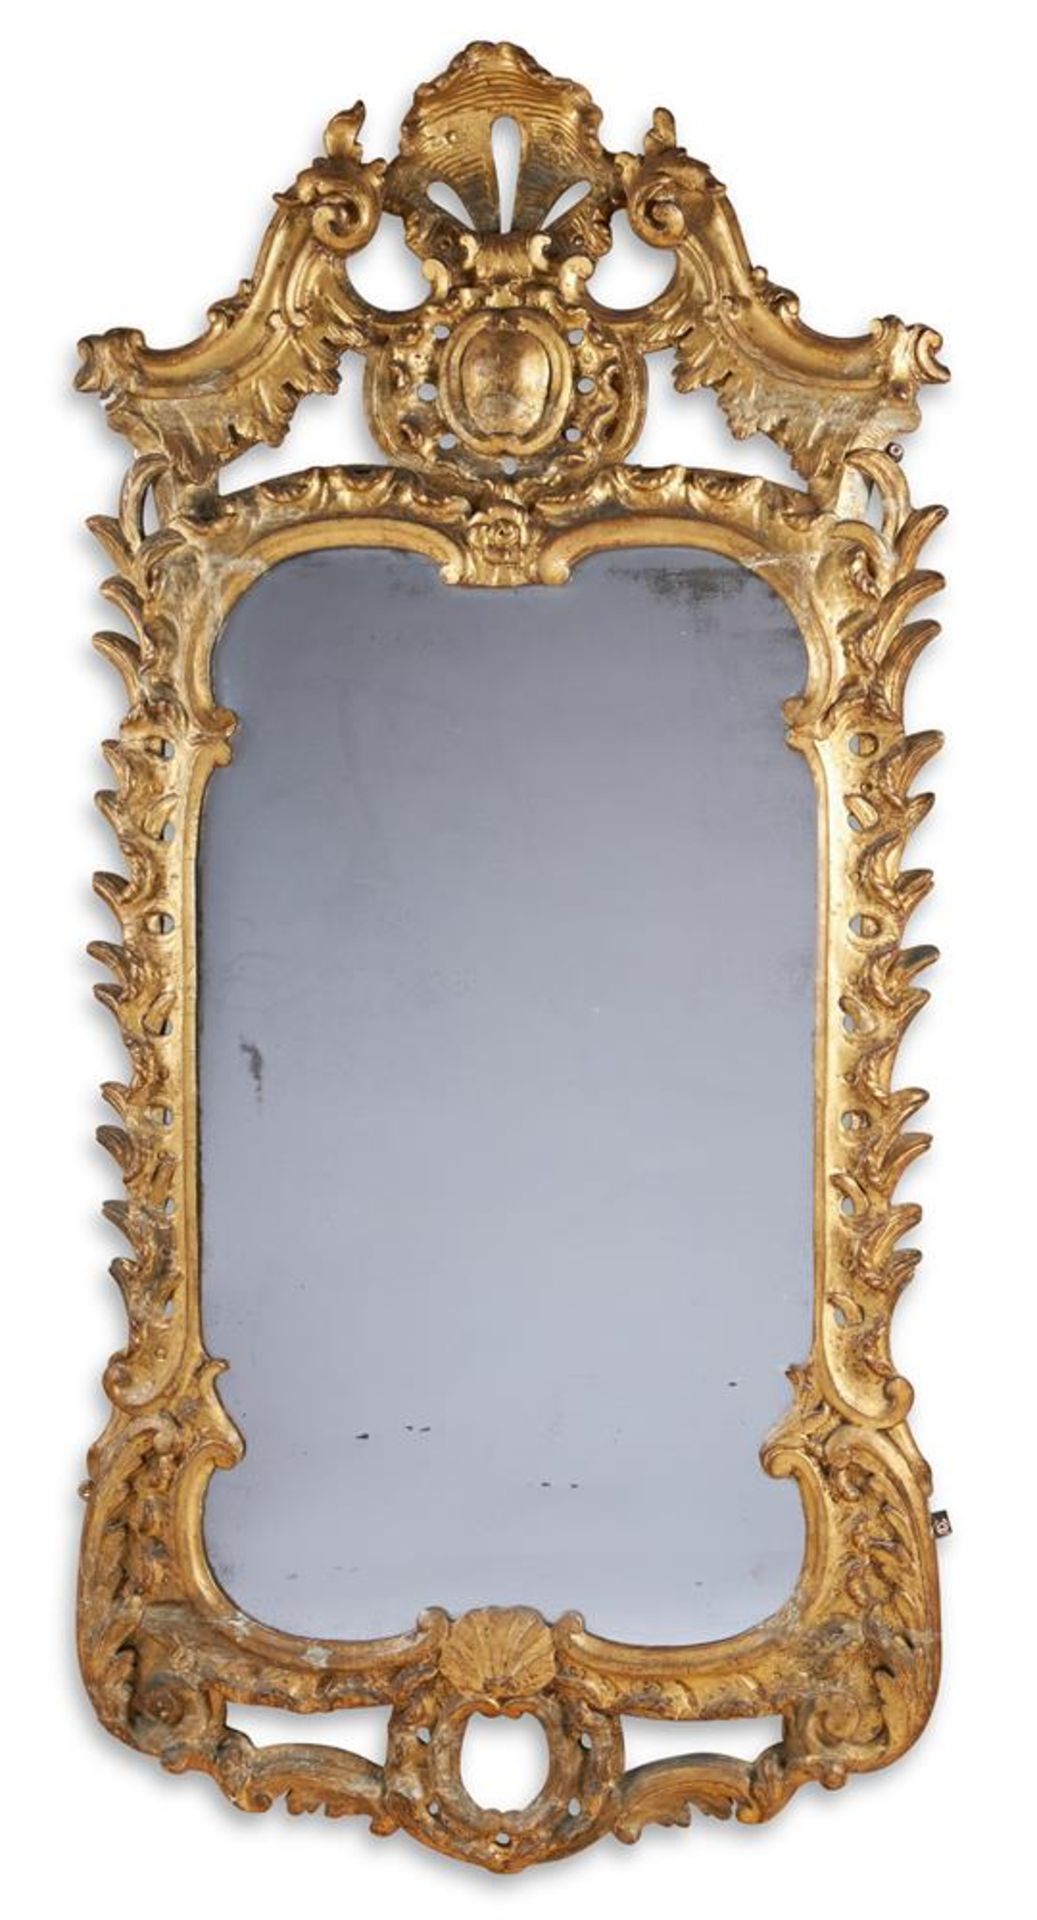 A PAIR OF GEORGE III GILTWOOD MIRRORS IN THE MANNER OF MATTHIAS LOCK, CIRCA 1750 - Image 4 of 4